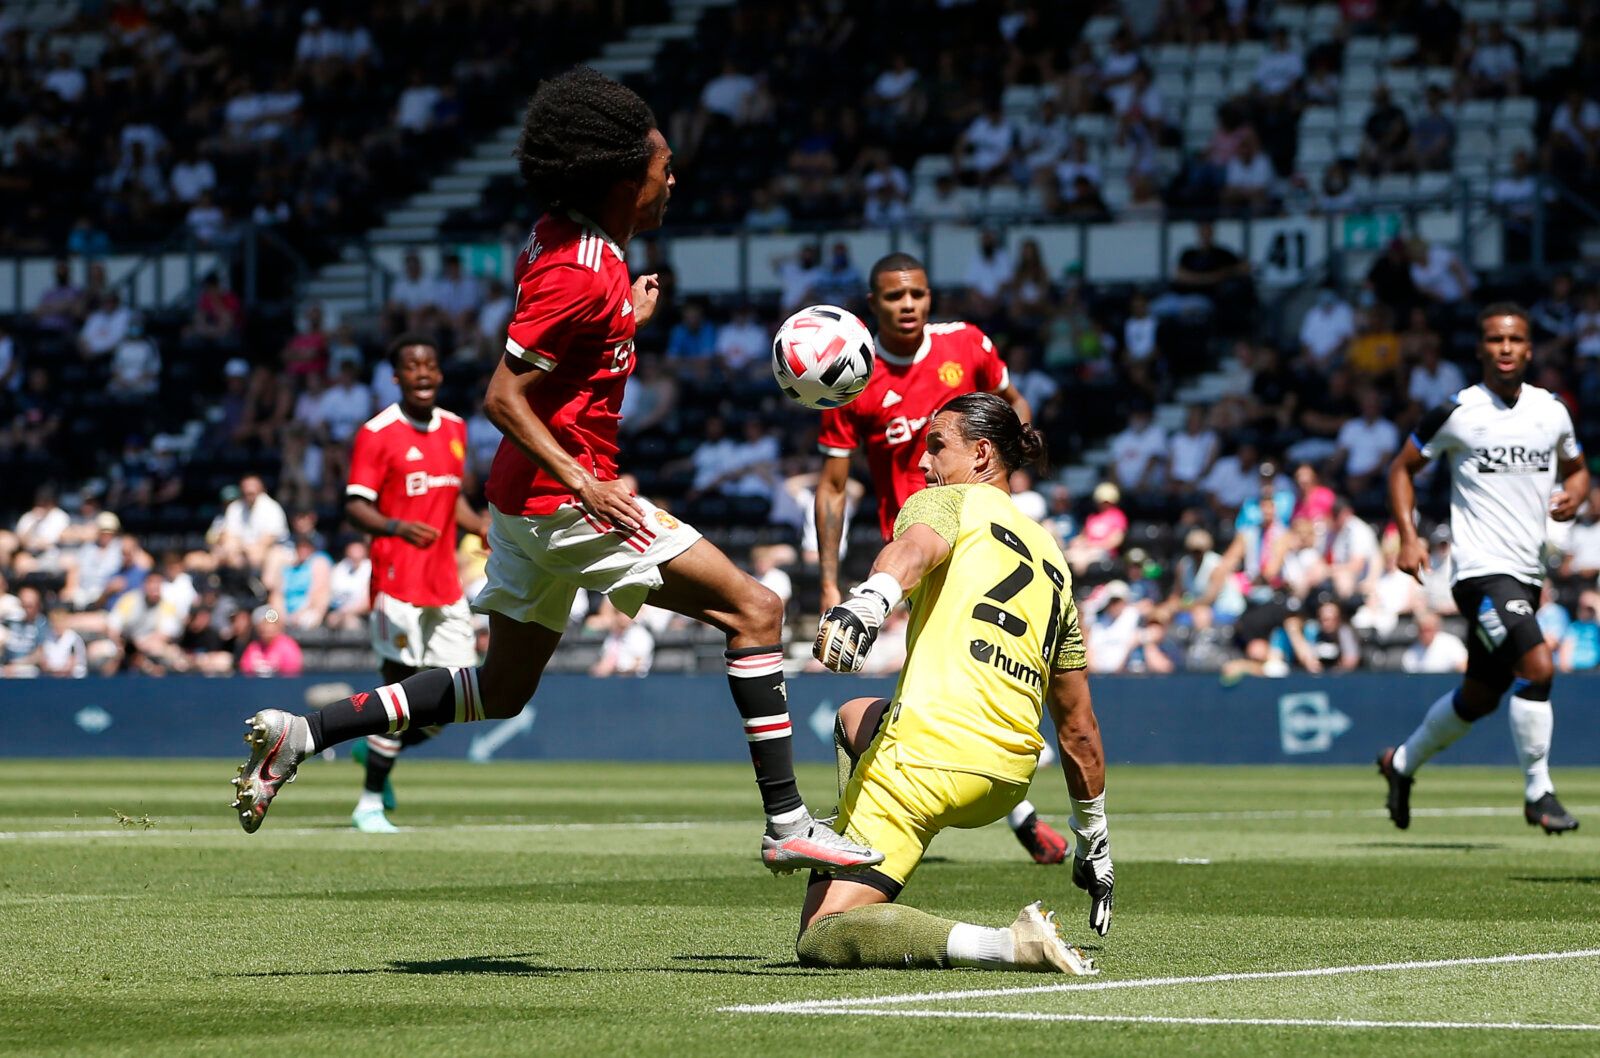 Soccer Football - Pre Season Friendly - Derby County v Manchester United - Pride Park, Derby, Britain - July 18, 2021 Manchester United's Tahith Chong in action before scoring their first goal Action Images via Reuters/Craig Brough